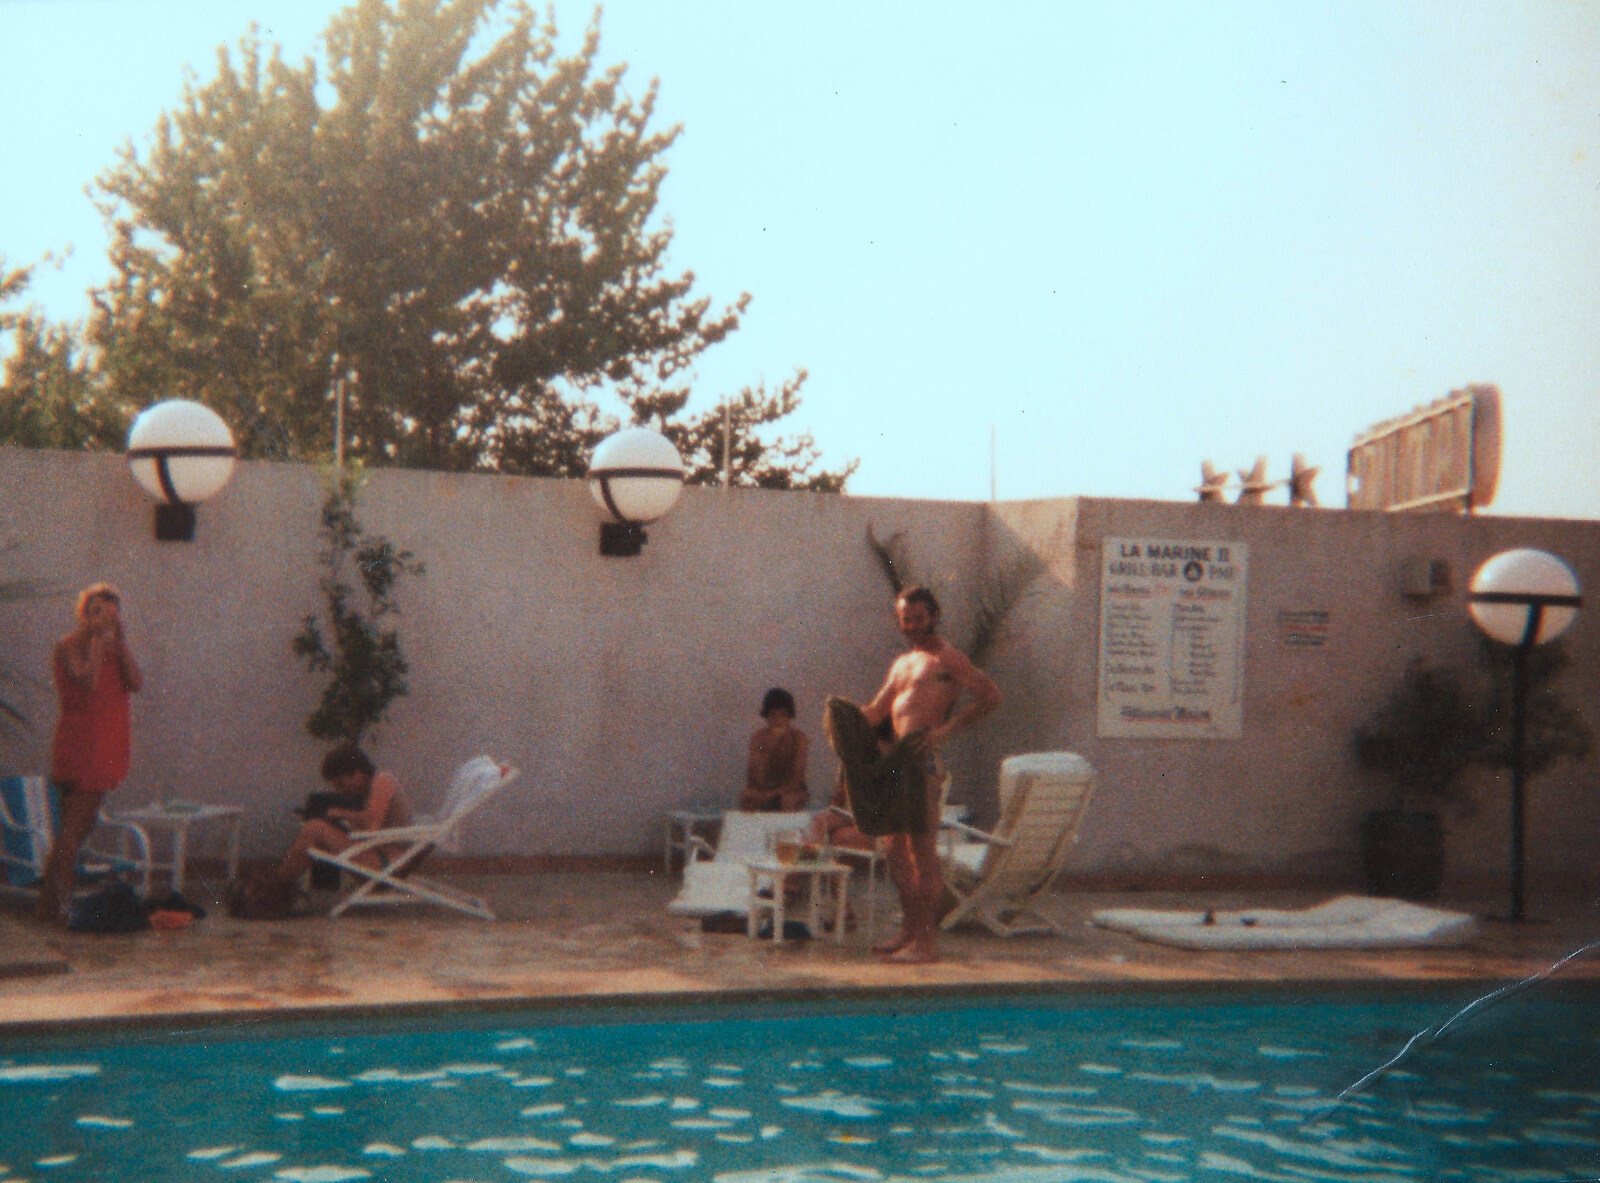 Dave by the side of La Marine II's pool from Camping with Sean, The Camargue, South of France, 15th July 1982